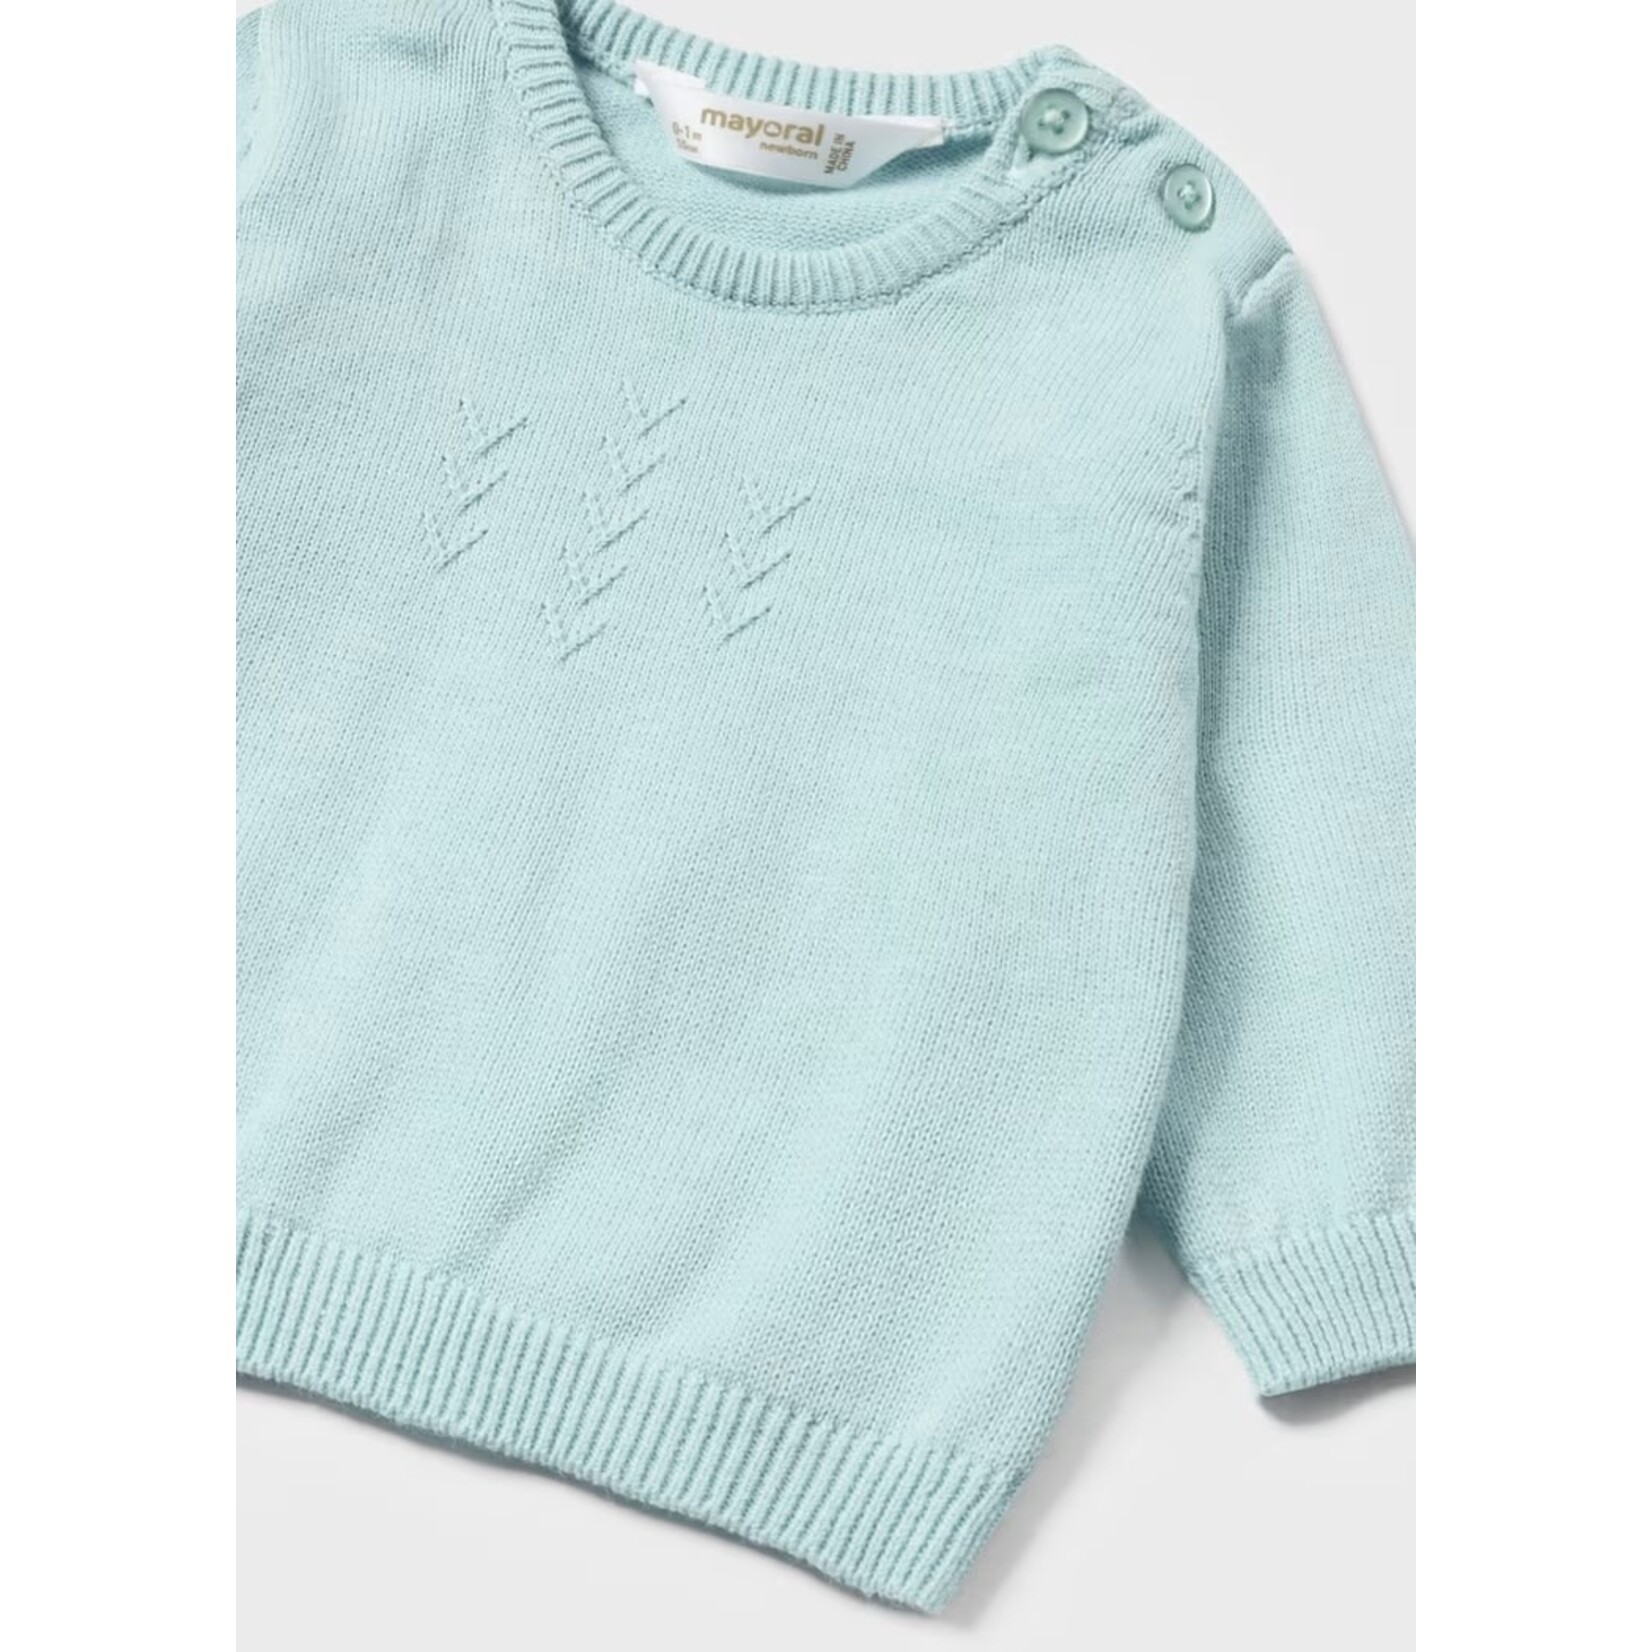 Mayoral MAYORAL - Two-piece set - Light turquoise knit sweater and striped knit pant